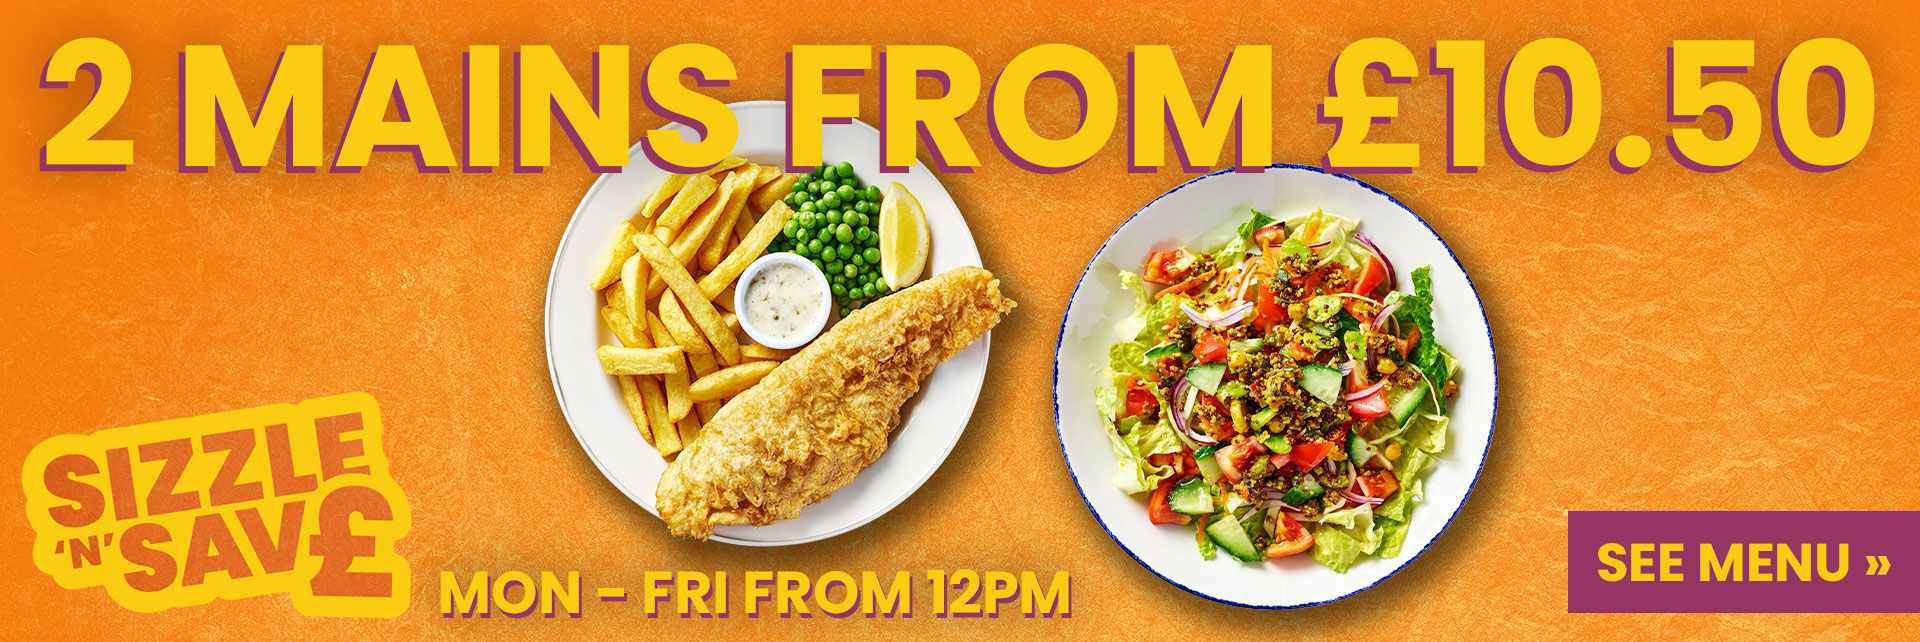 Image promoting 2 for £10 meals at Sizzling Pubs